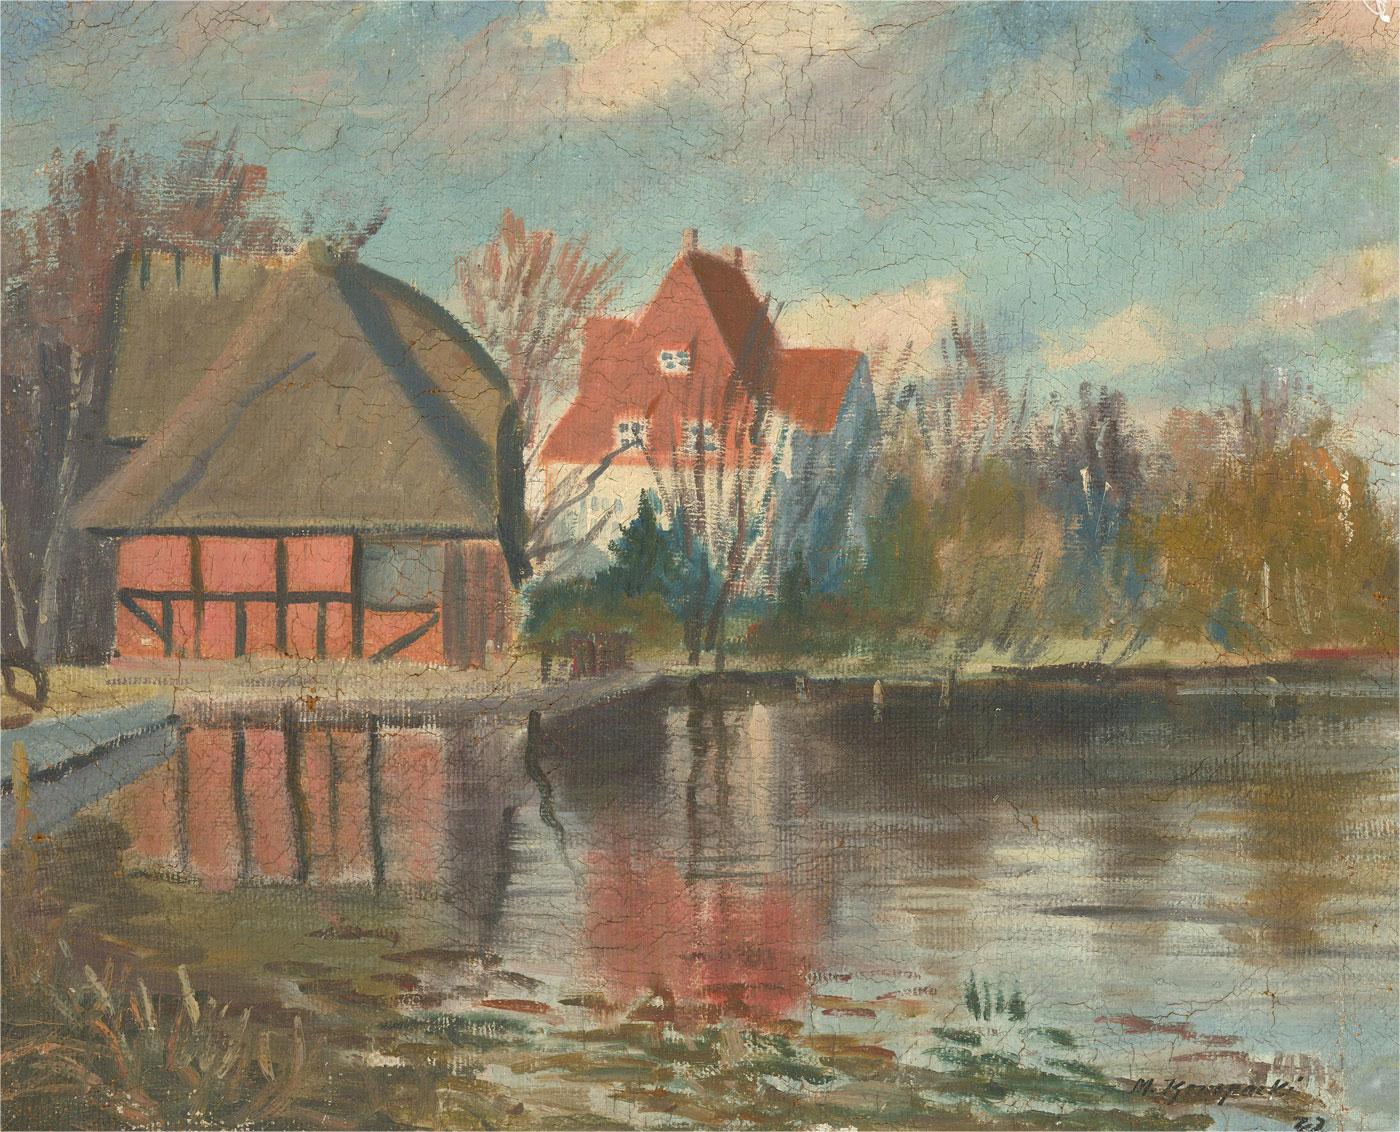 This charming landscape scene depicts houses in a Danish village on the verge of a calm lake. Painted in gestural brush strokes and a muted palette, capturing the tranquillity of the scene. Signed illegibly and dated to the lower right. On canvas on